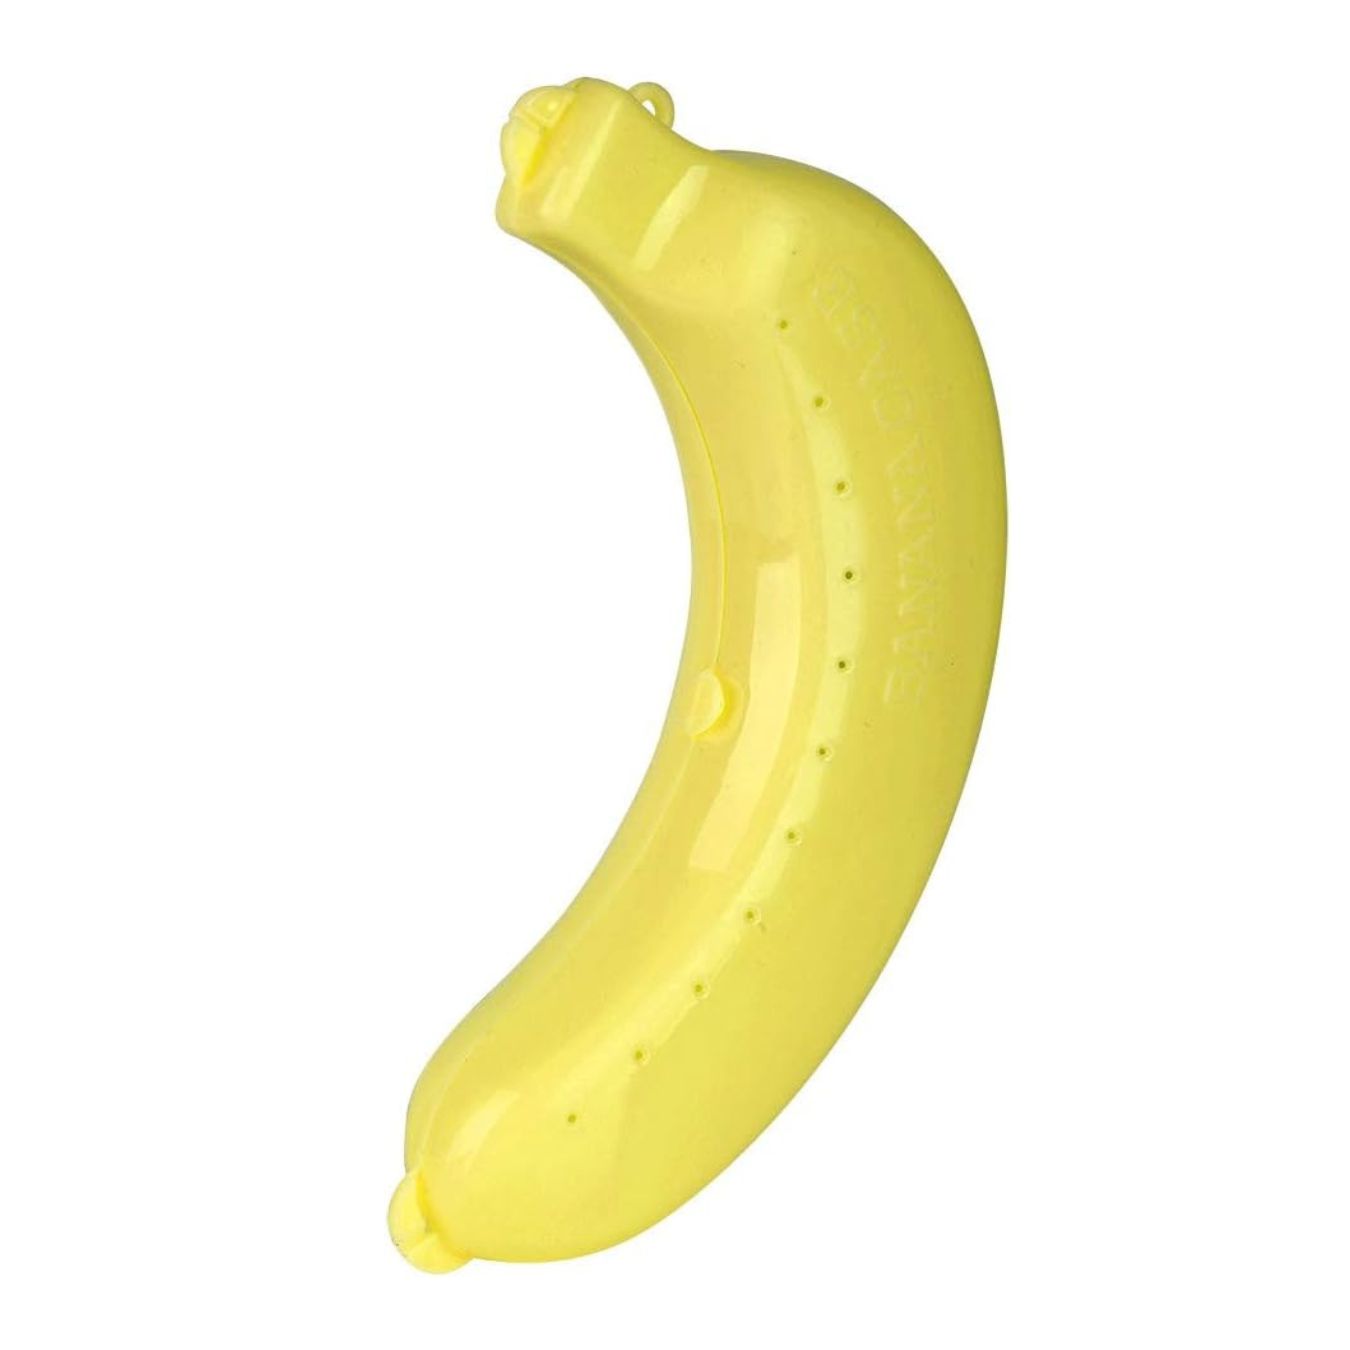 Is That a Banana in Your Pocket? Banana Holder Case